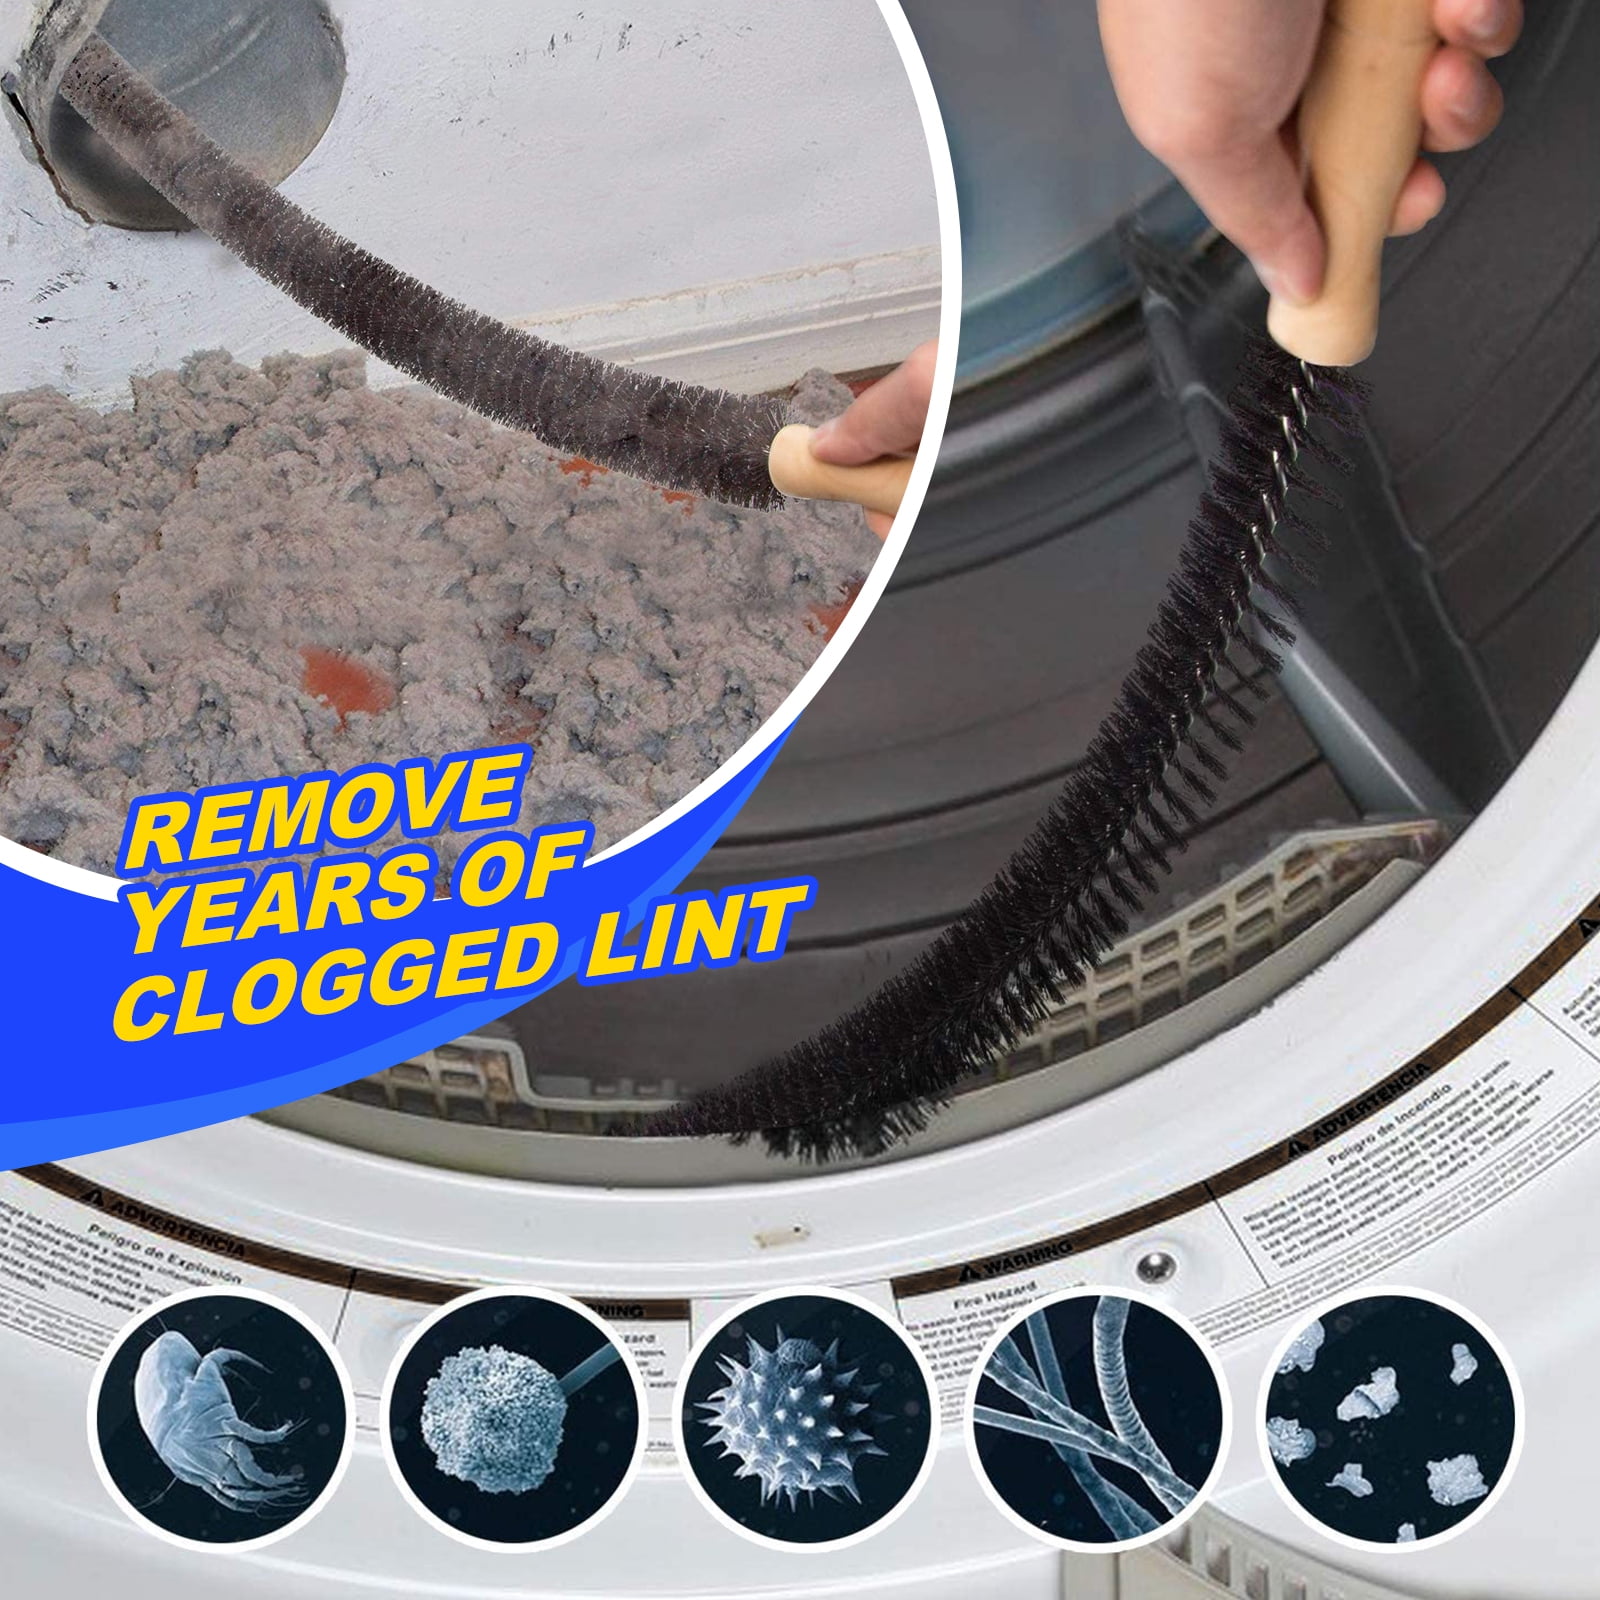 2 PCS Complete Dryer Vent Cleaning Kit - Includes Lint Brush, Trap